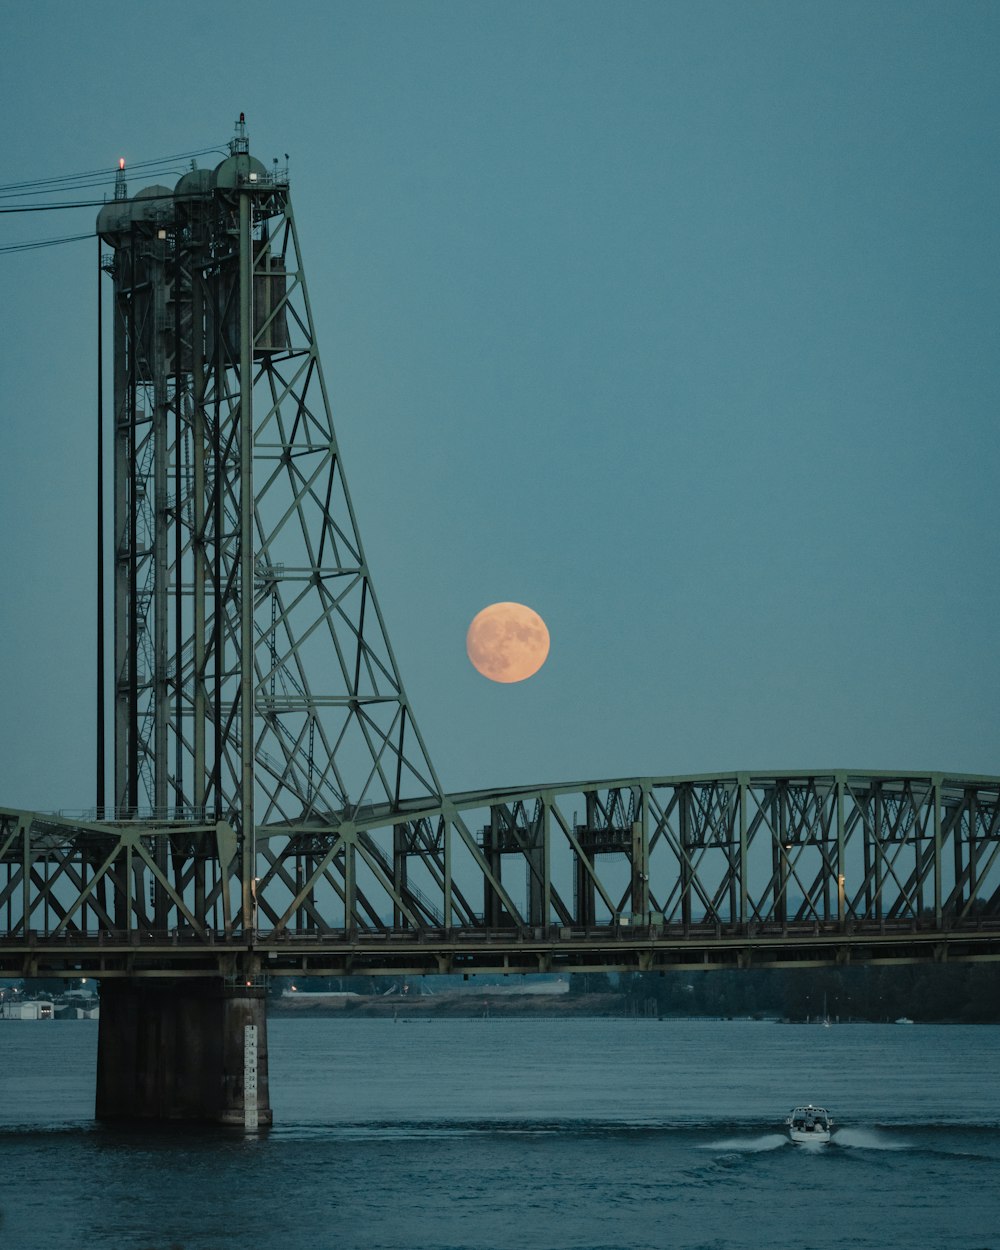 a bridge with a moon in the sky